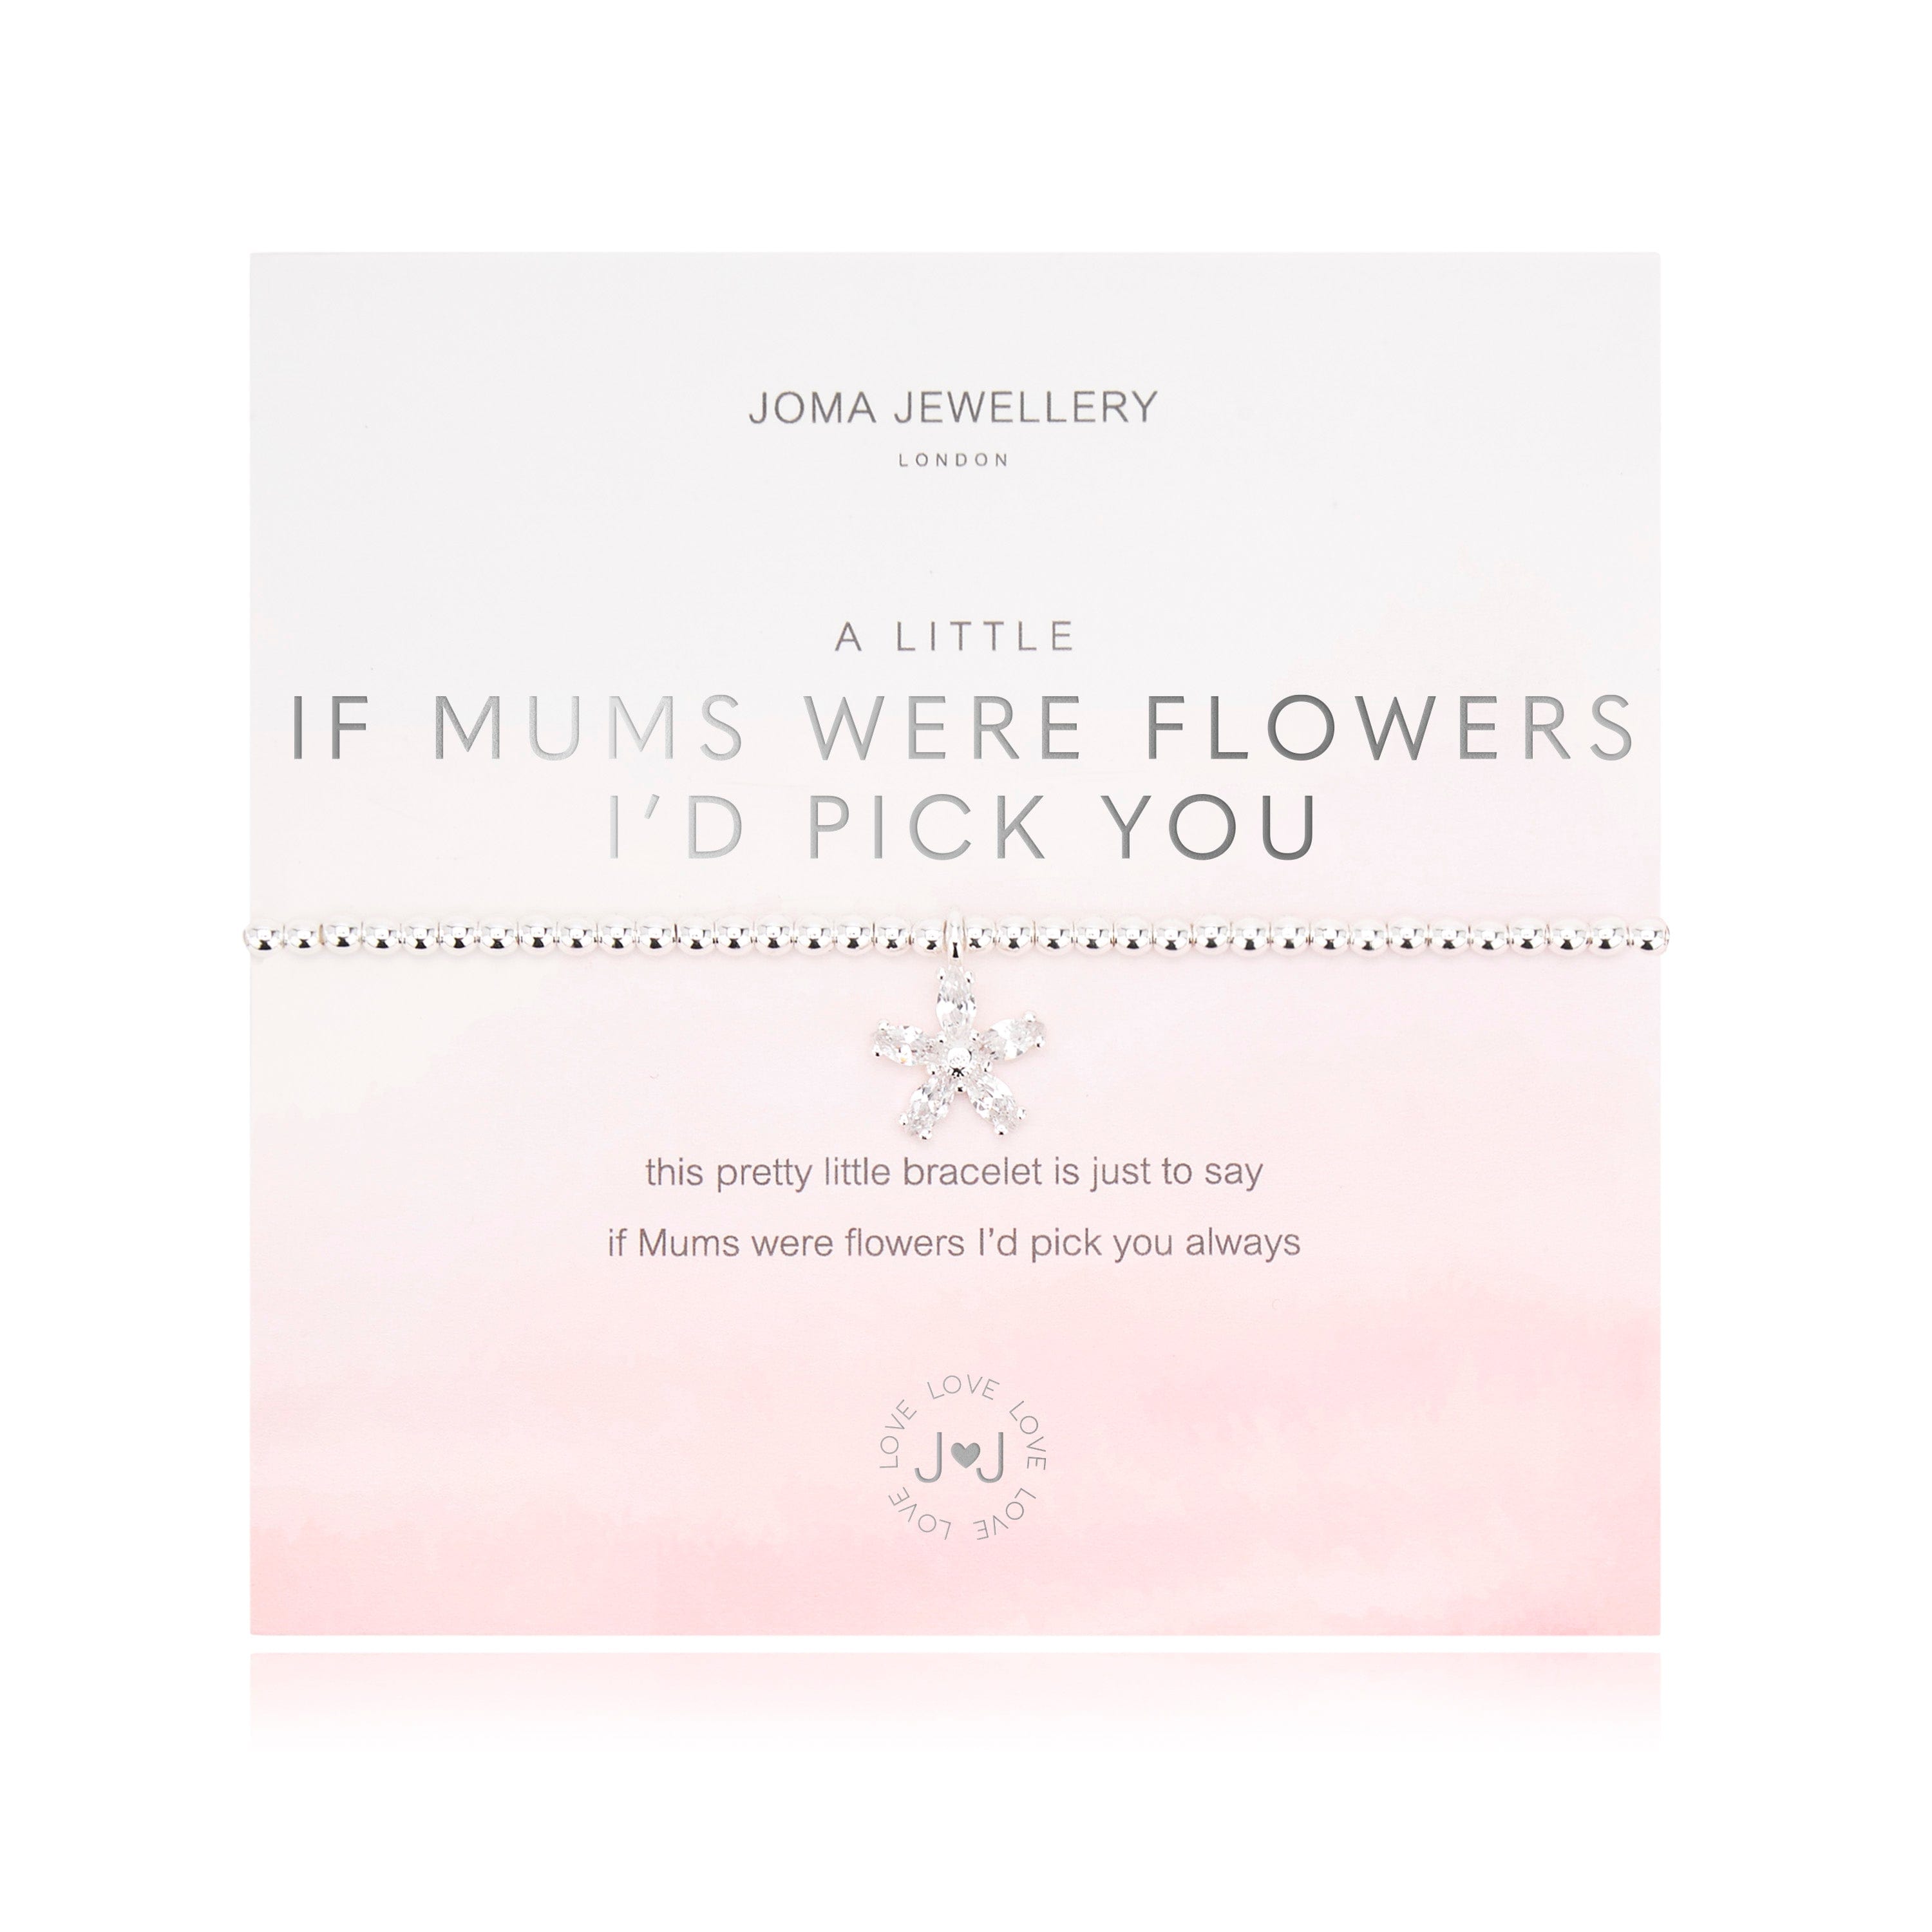 Joma Jewellery Bracelet Joma Jewellery Bracelet - If Mums were Flowers I'd Pick You